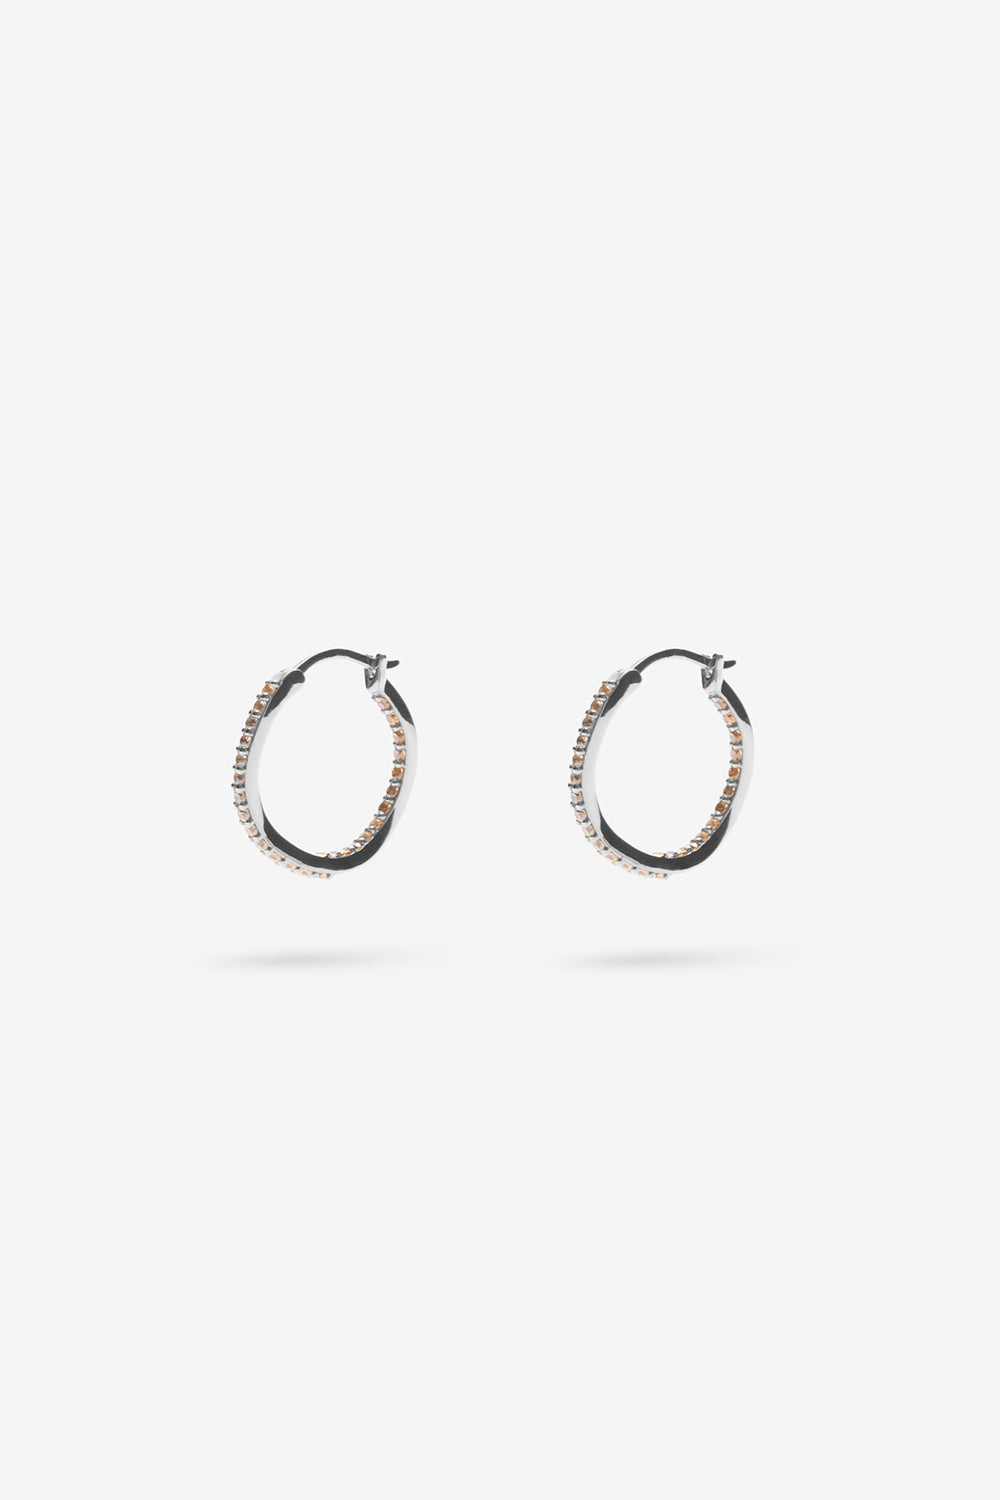 Jaunt Paved Hoops - Champagne - Sterling Silver